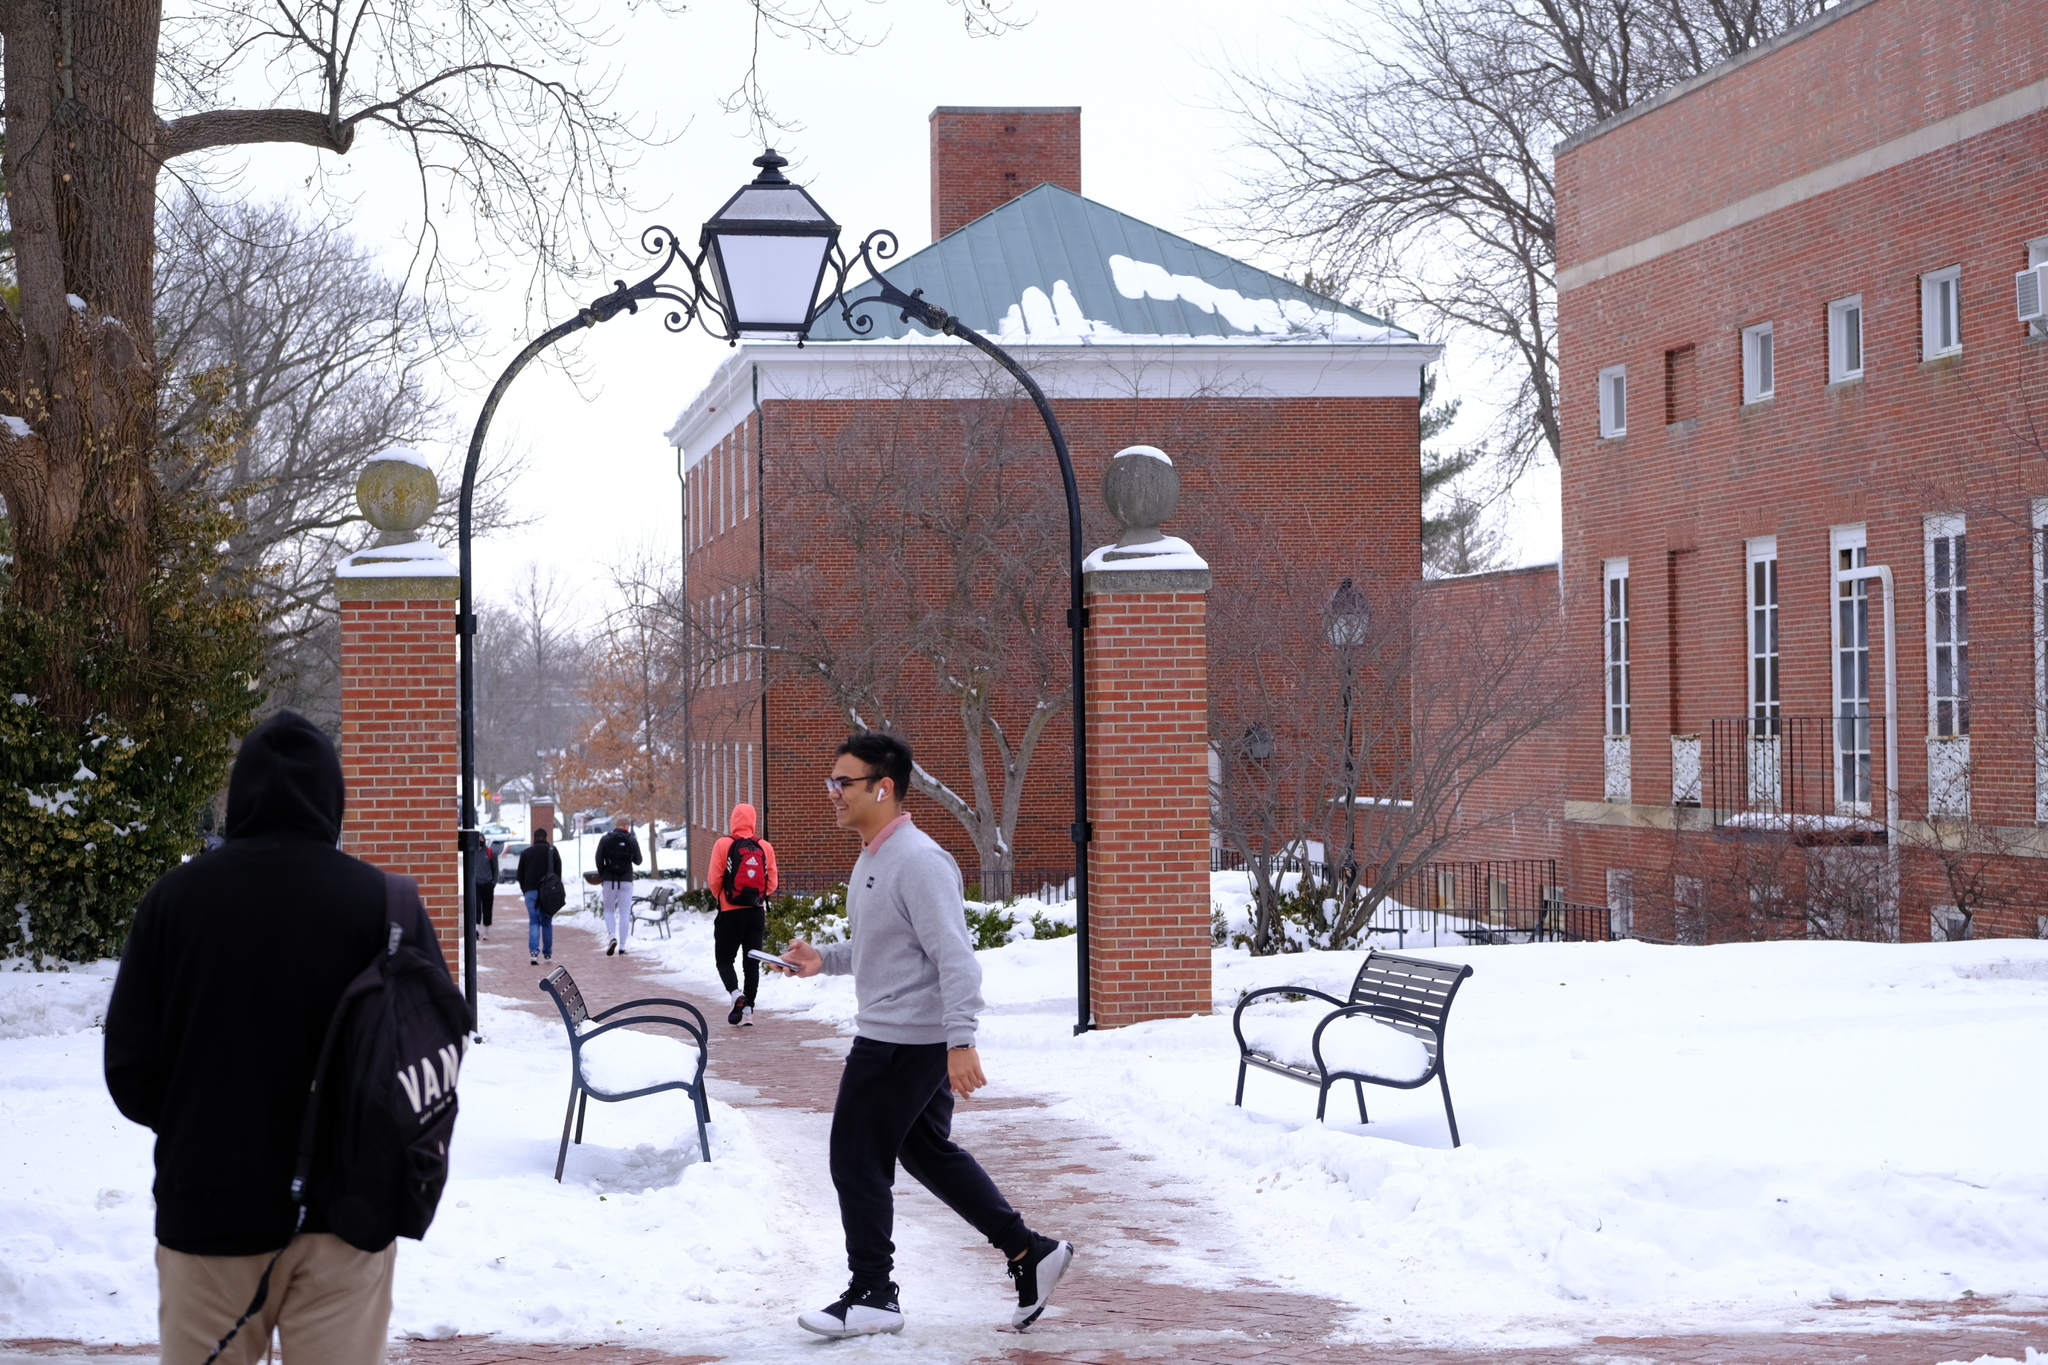 Students on campus after a fresh snowfall.